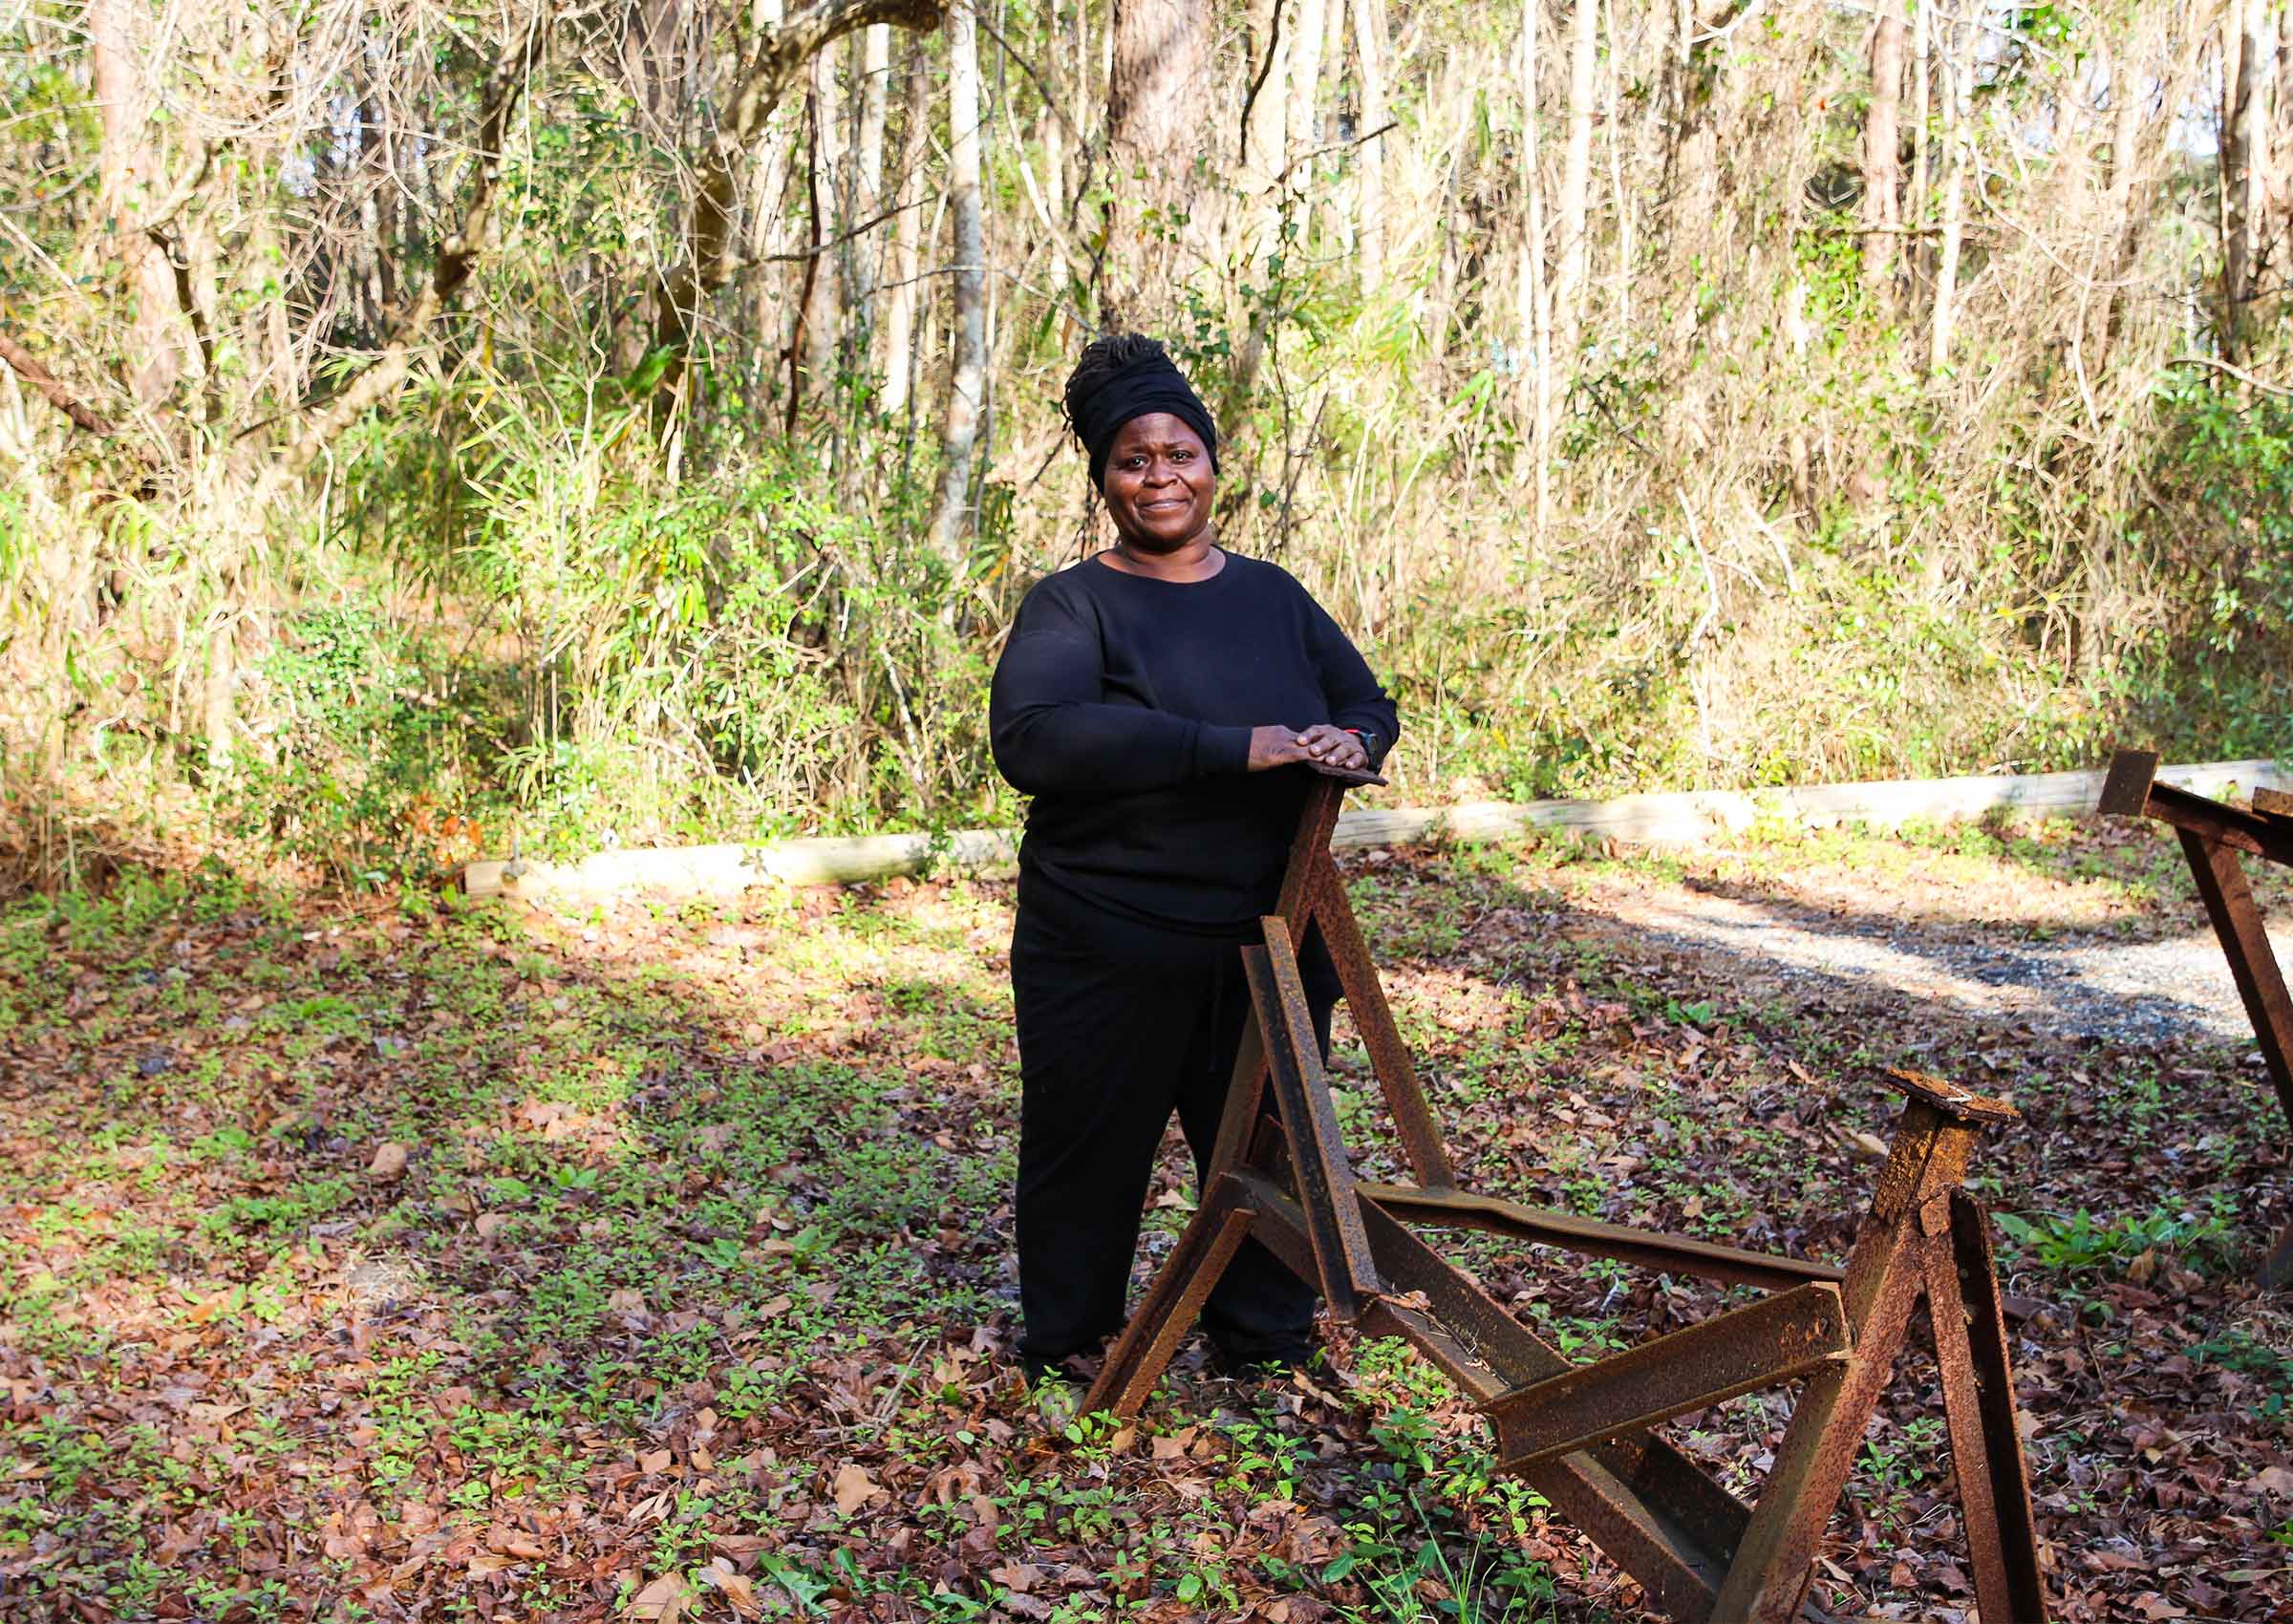 Georgette Sanders poses wearing all black clothes for a camera with her hands placed on a piece of metal and mixed foliage in the background March 2022.